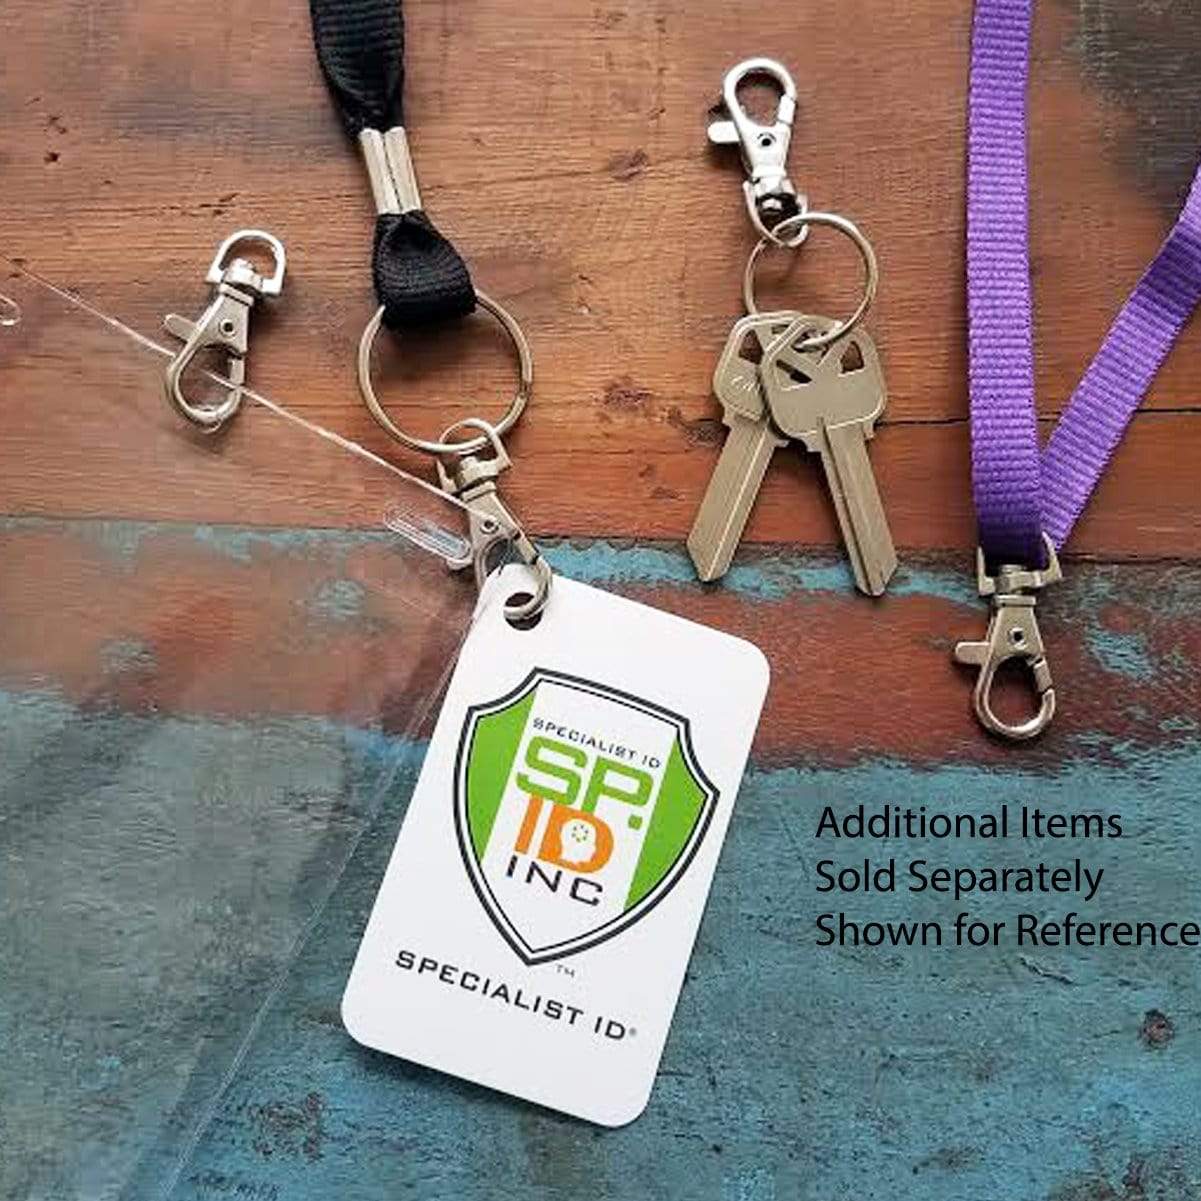 Shop for and Buy Split Key Ring Nickel Plated 3 Inch Diameter (China) at  . Large selection and bulk discounts available.